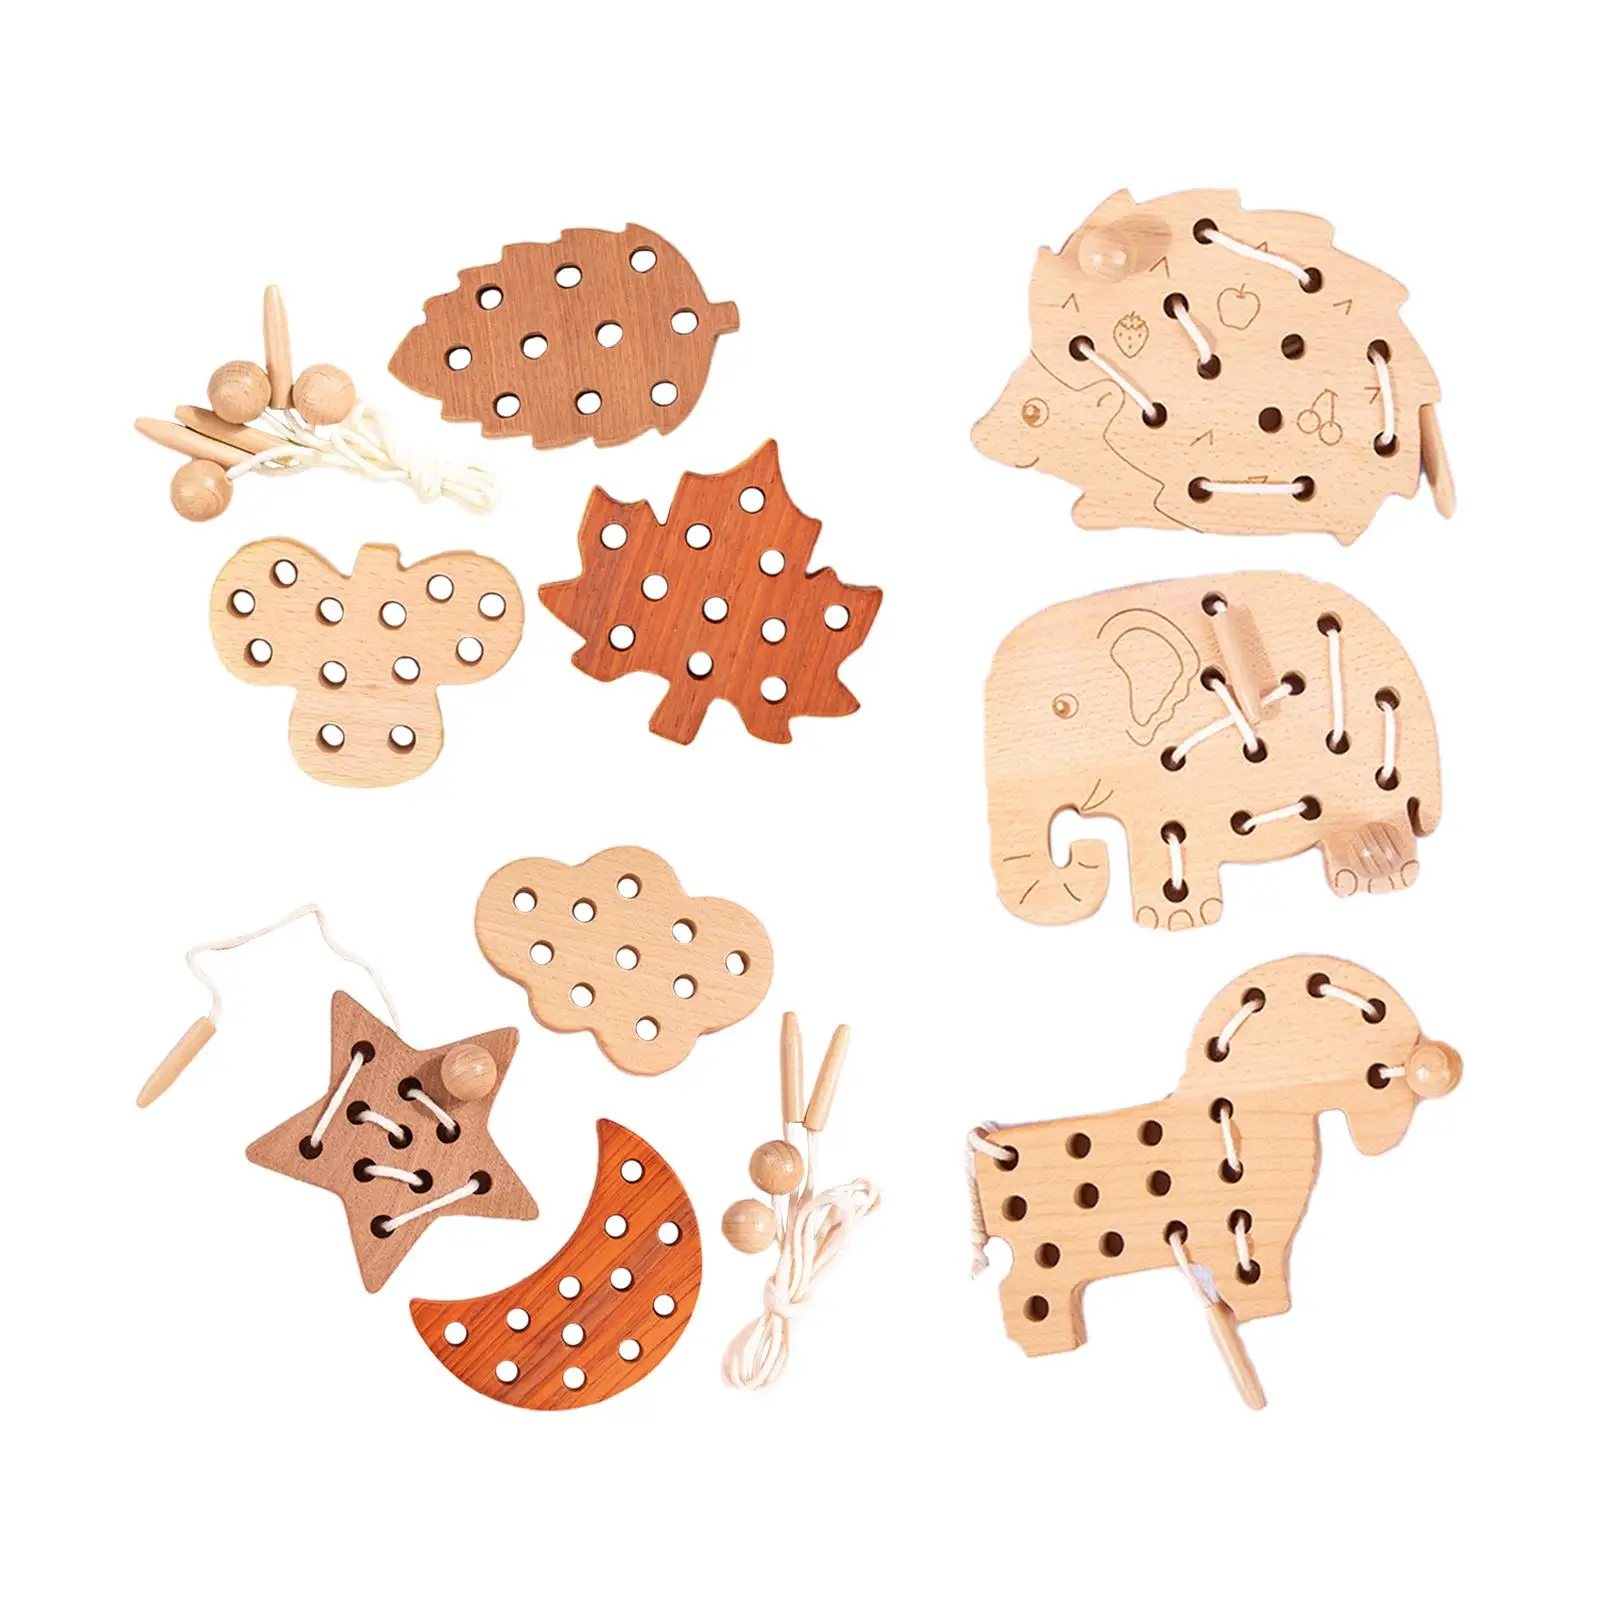 3 Pieces Wooden Lacing Threading Toys Teaching Aids Activities Board Travel Game Educational Wood Lace Block Puzzle for Car